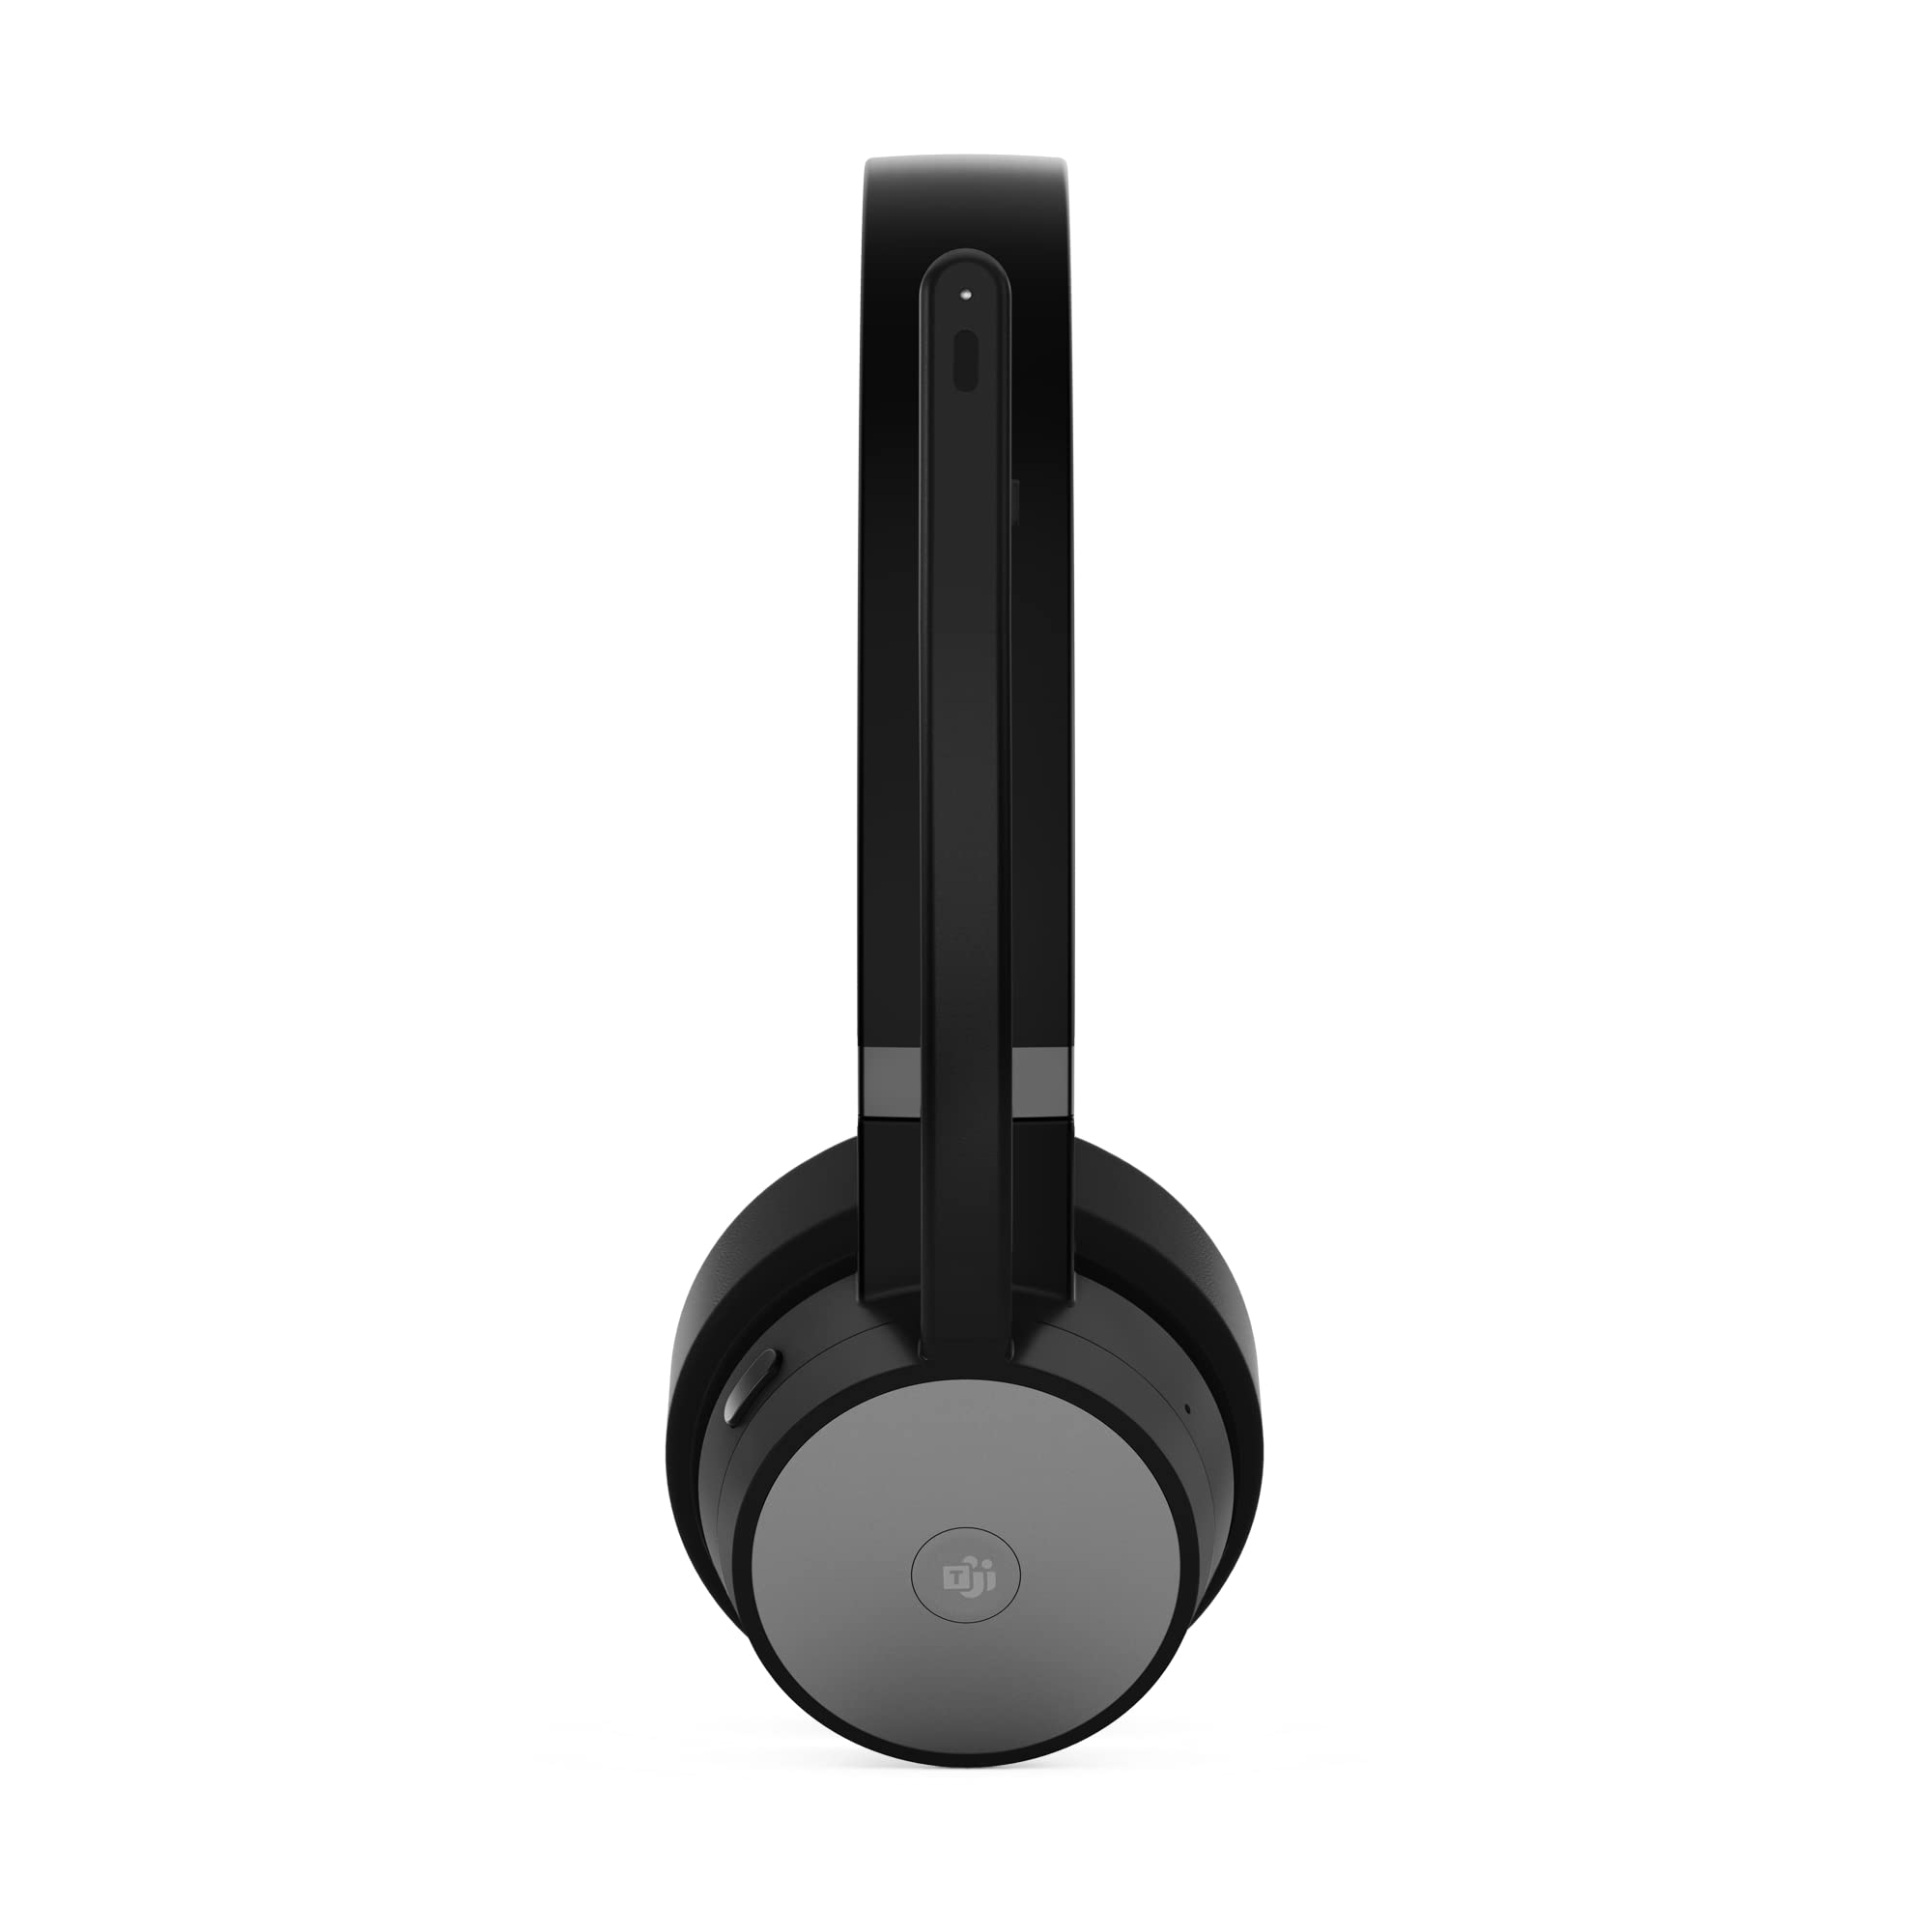 Lenovo Go Wireless ANC Headset - Stereo - USB Type C - Wired/Wireless - Bluetooth - 32.8 ft - 32 Ohm - 20 Hz - 20 kHz - Over-the-head - Binaural - Ear-cup - 4.27 ft Cable - Noise Cancelling Microphone